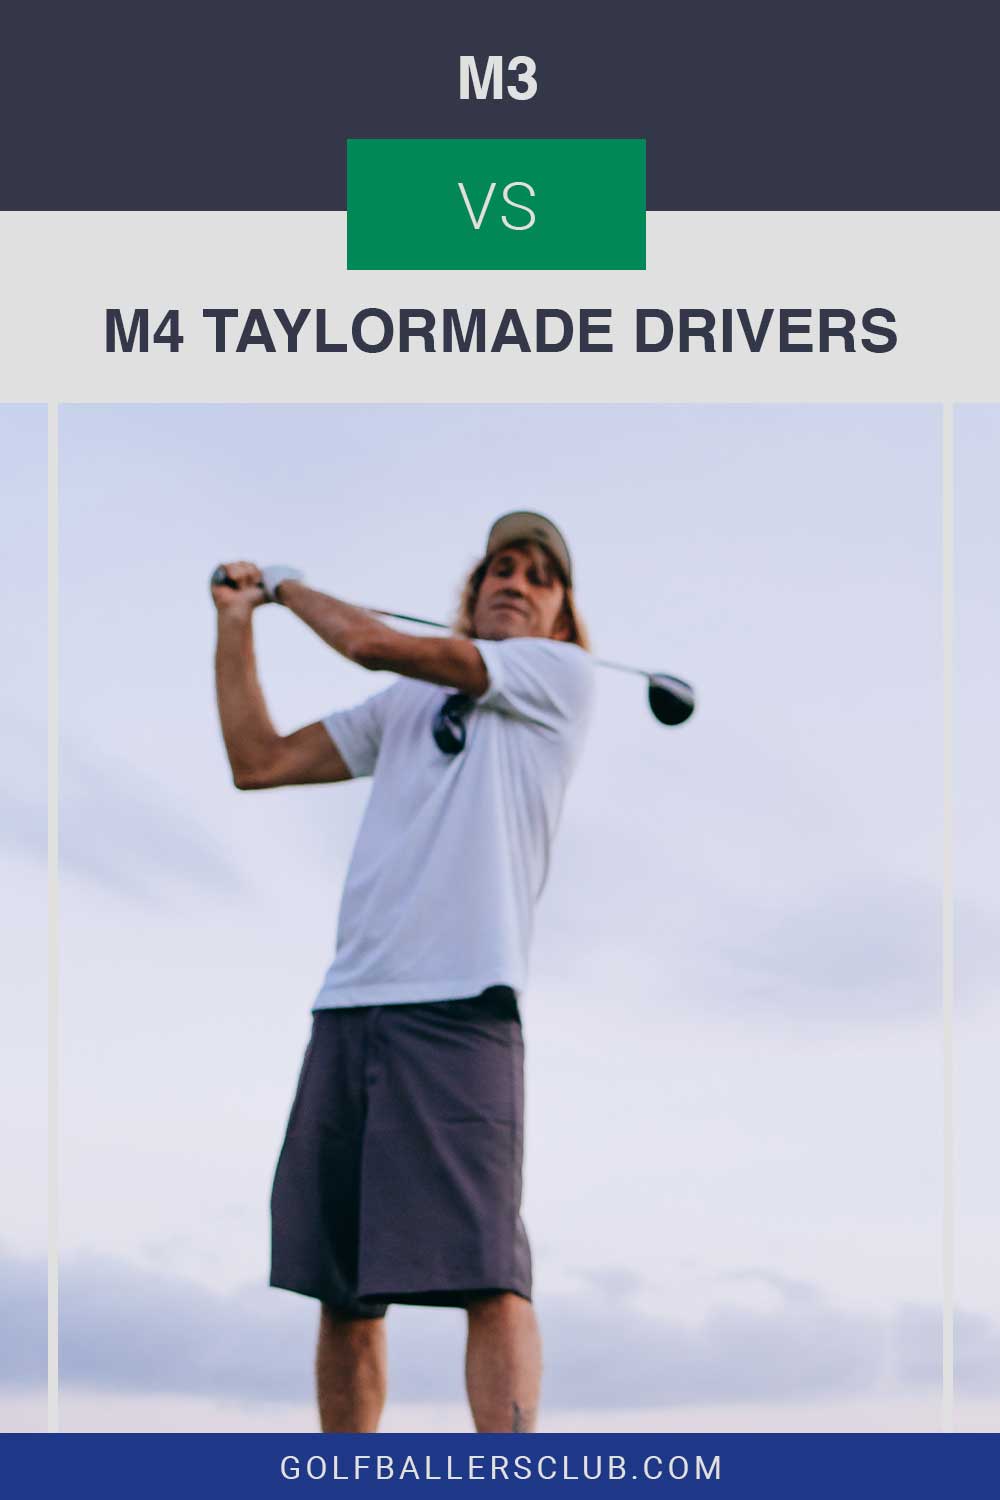 Man wearing white t shirt is taking shot with a golf driver - M3 vs. M4 TaylorMade Drivers